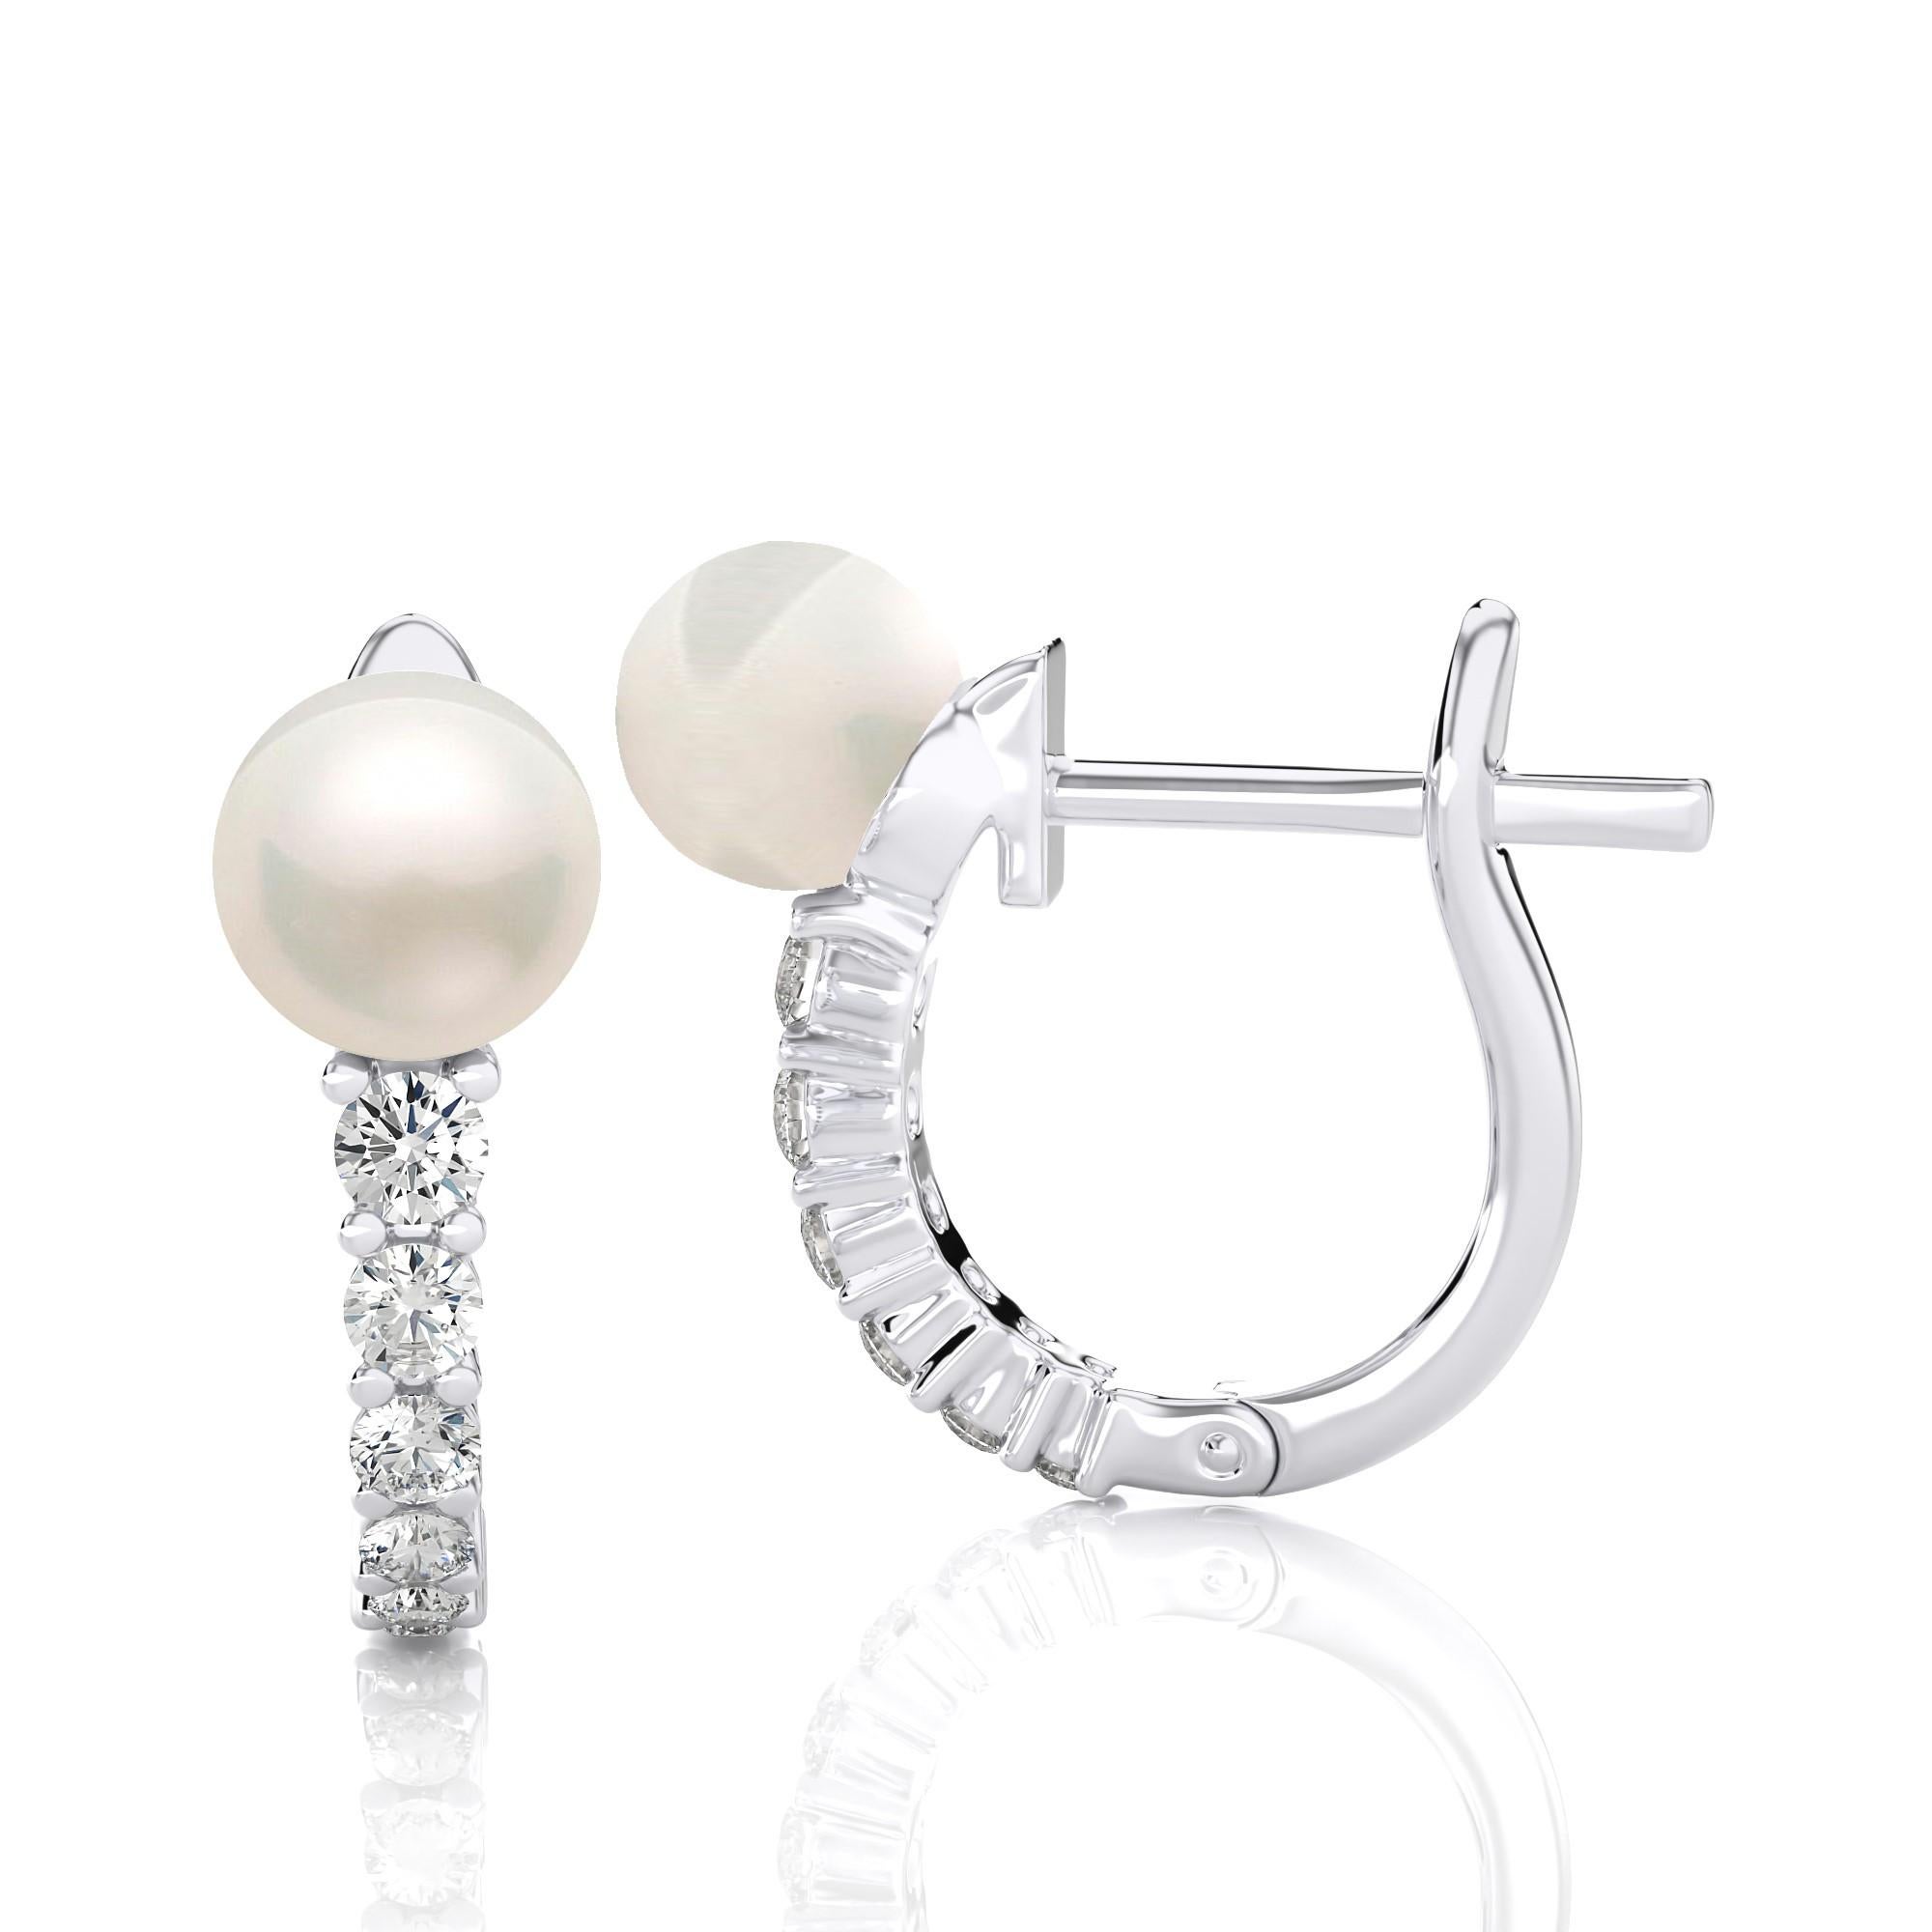 Modern Diamond And Pearl Huggie Earrings.

Unveiling the allure of these remarkable Diamond And Pearl Huggie earrings, adorned with authentic Natural Earth-Mined Diamonds. The set features a row of diamonds, securely cradled in a classic 4-prong